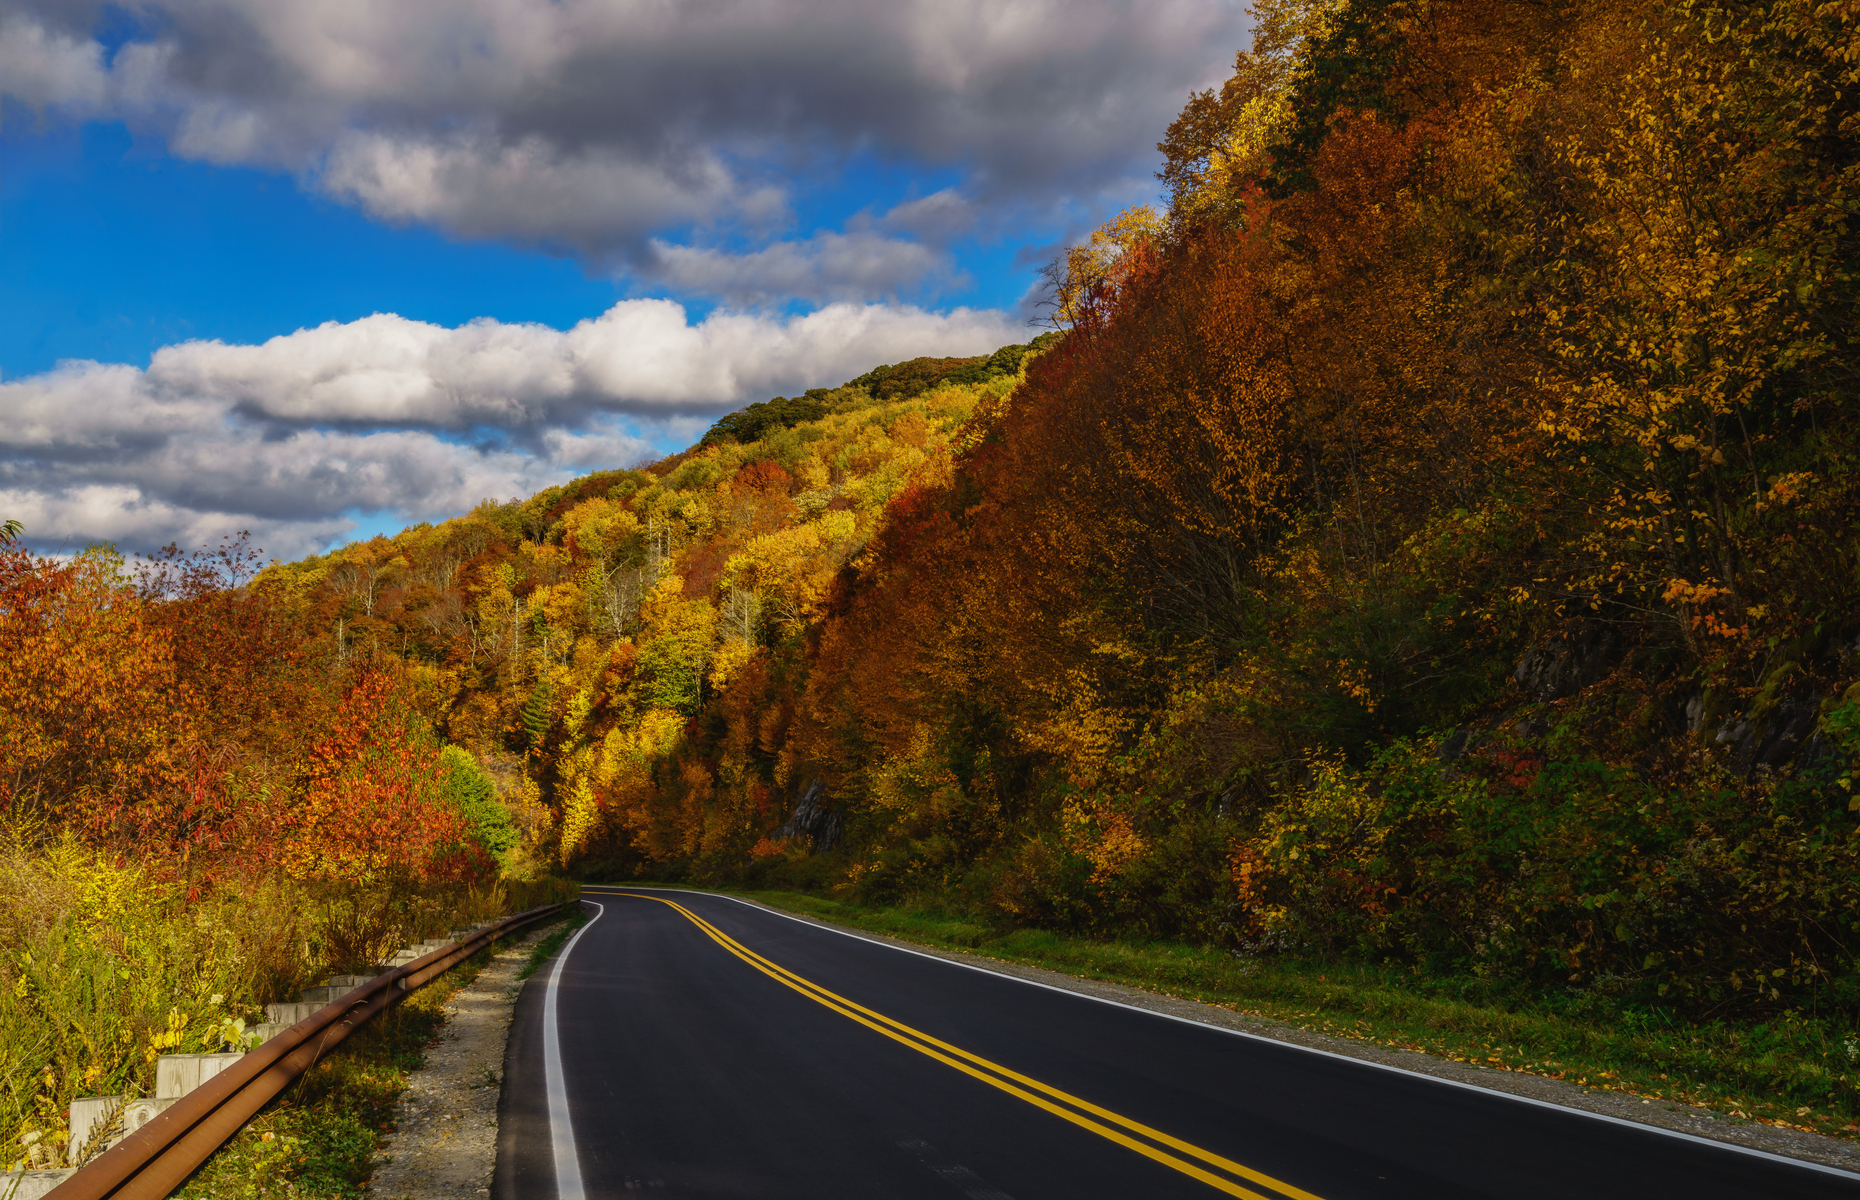 <p>Named a National Scenic Byway, the <a href="https://www.roadtripsandcoffee.com/road-trip-cherohala-skyway-tennessee-north-carolina/" title="https://www.roadtripsandcoffee.com/road-trip-cherohala-skyway-tennessee-north-carolina/">Cherohala Skyway </a>delivers an amazing scenic drive through the Appalachian Mountains of Tennessee and North Carolina. The 41-mile route ascends about 4,500 feet and winds around mountain peaks and provides scenic outlooks from a mile up. A lovely hidden waterfall, a lake beach, many mountain vistas and tons of hiking trails are among the other attractions on the skyway.</p>